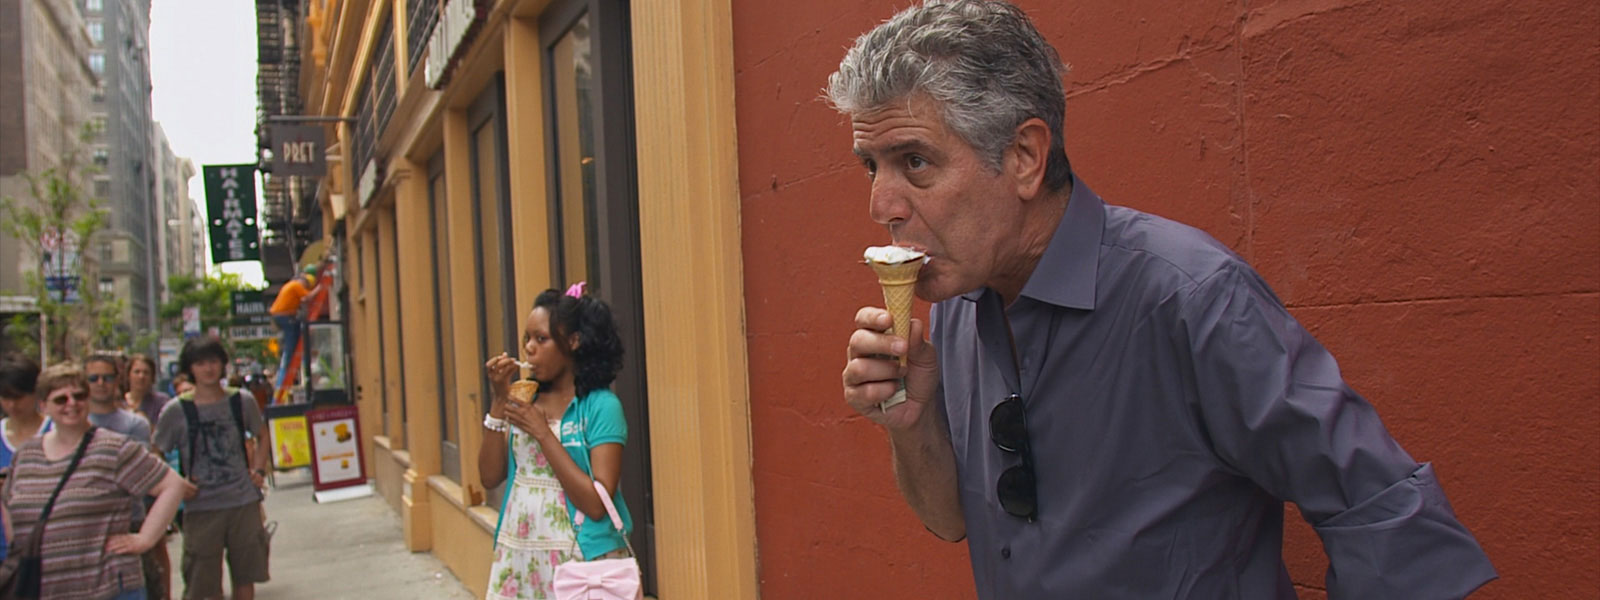 Image from 'Roadrunner: A Film About Anthony Bourdain'